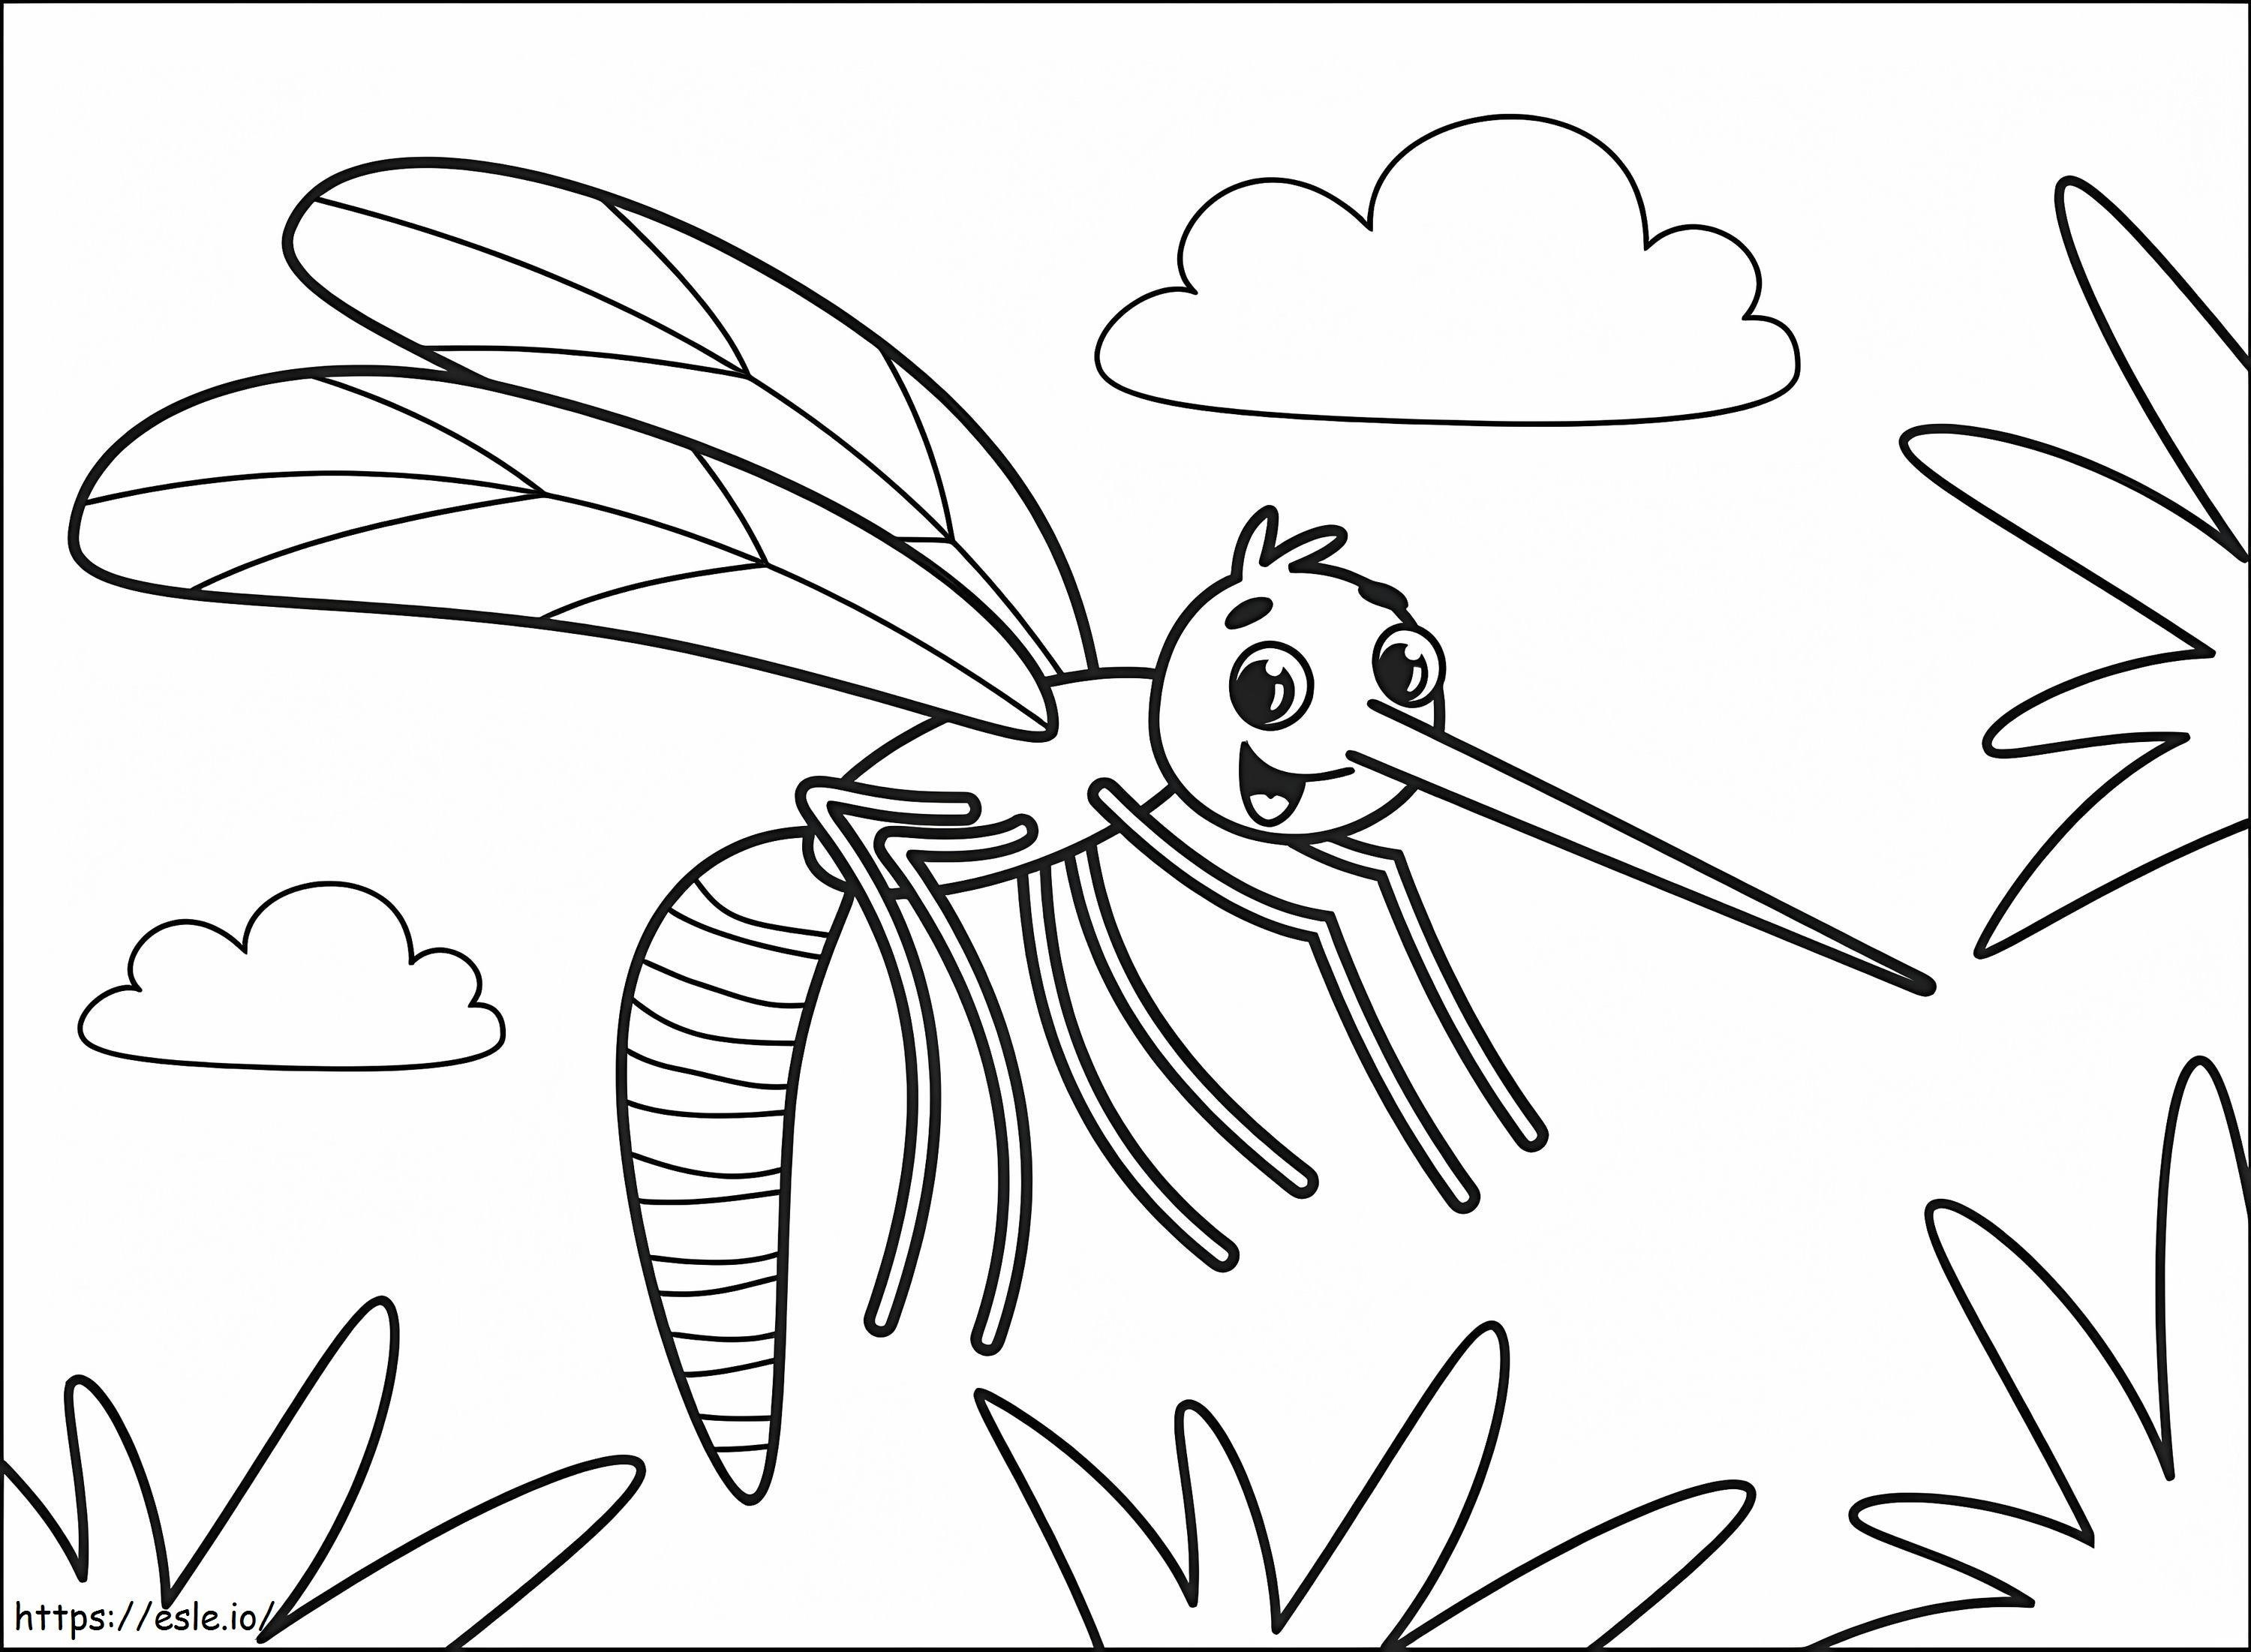 Mosquito Smiling coloring page